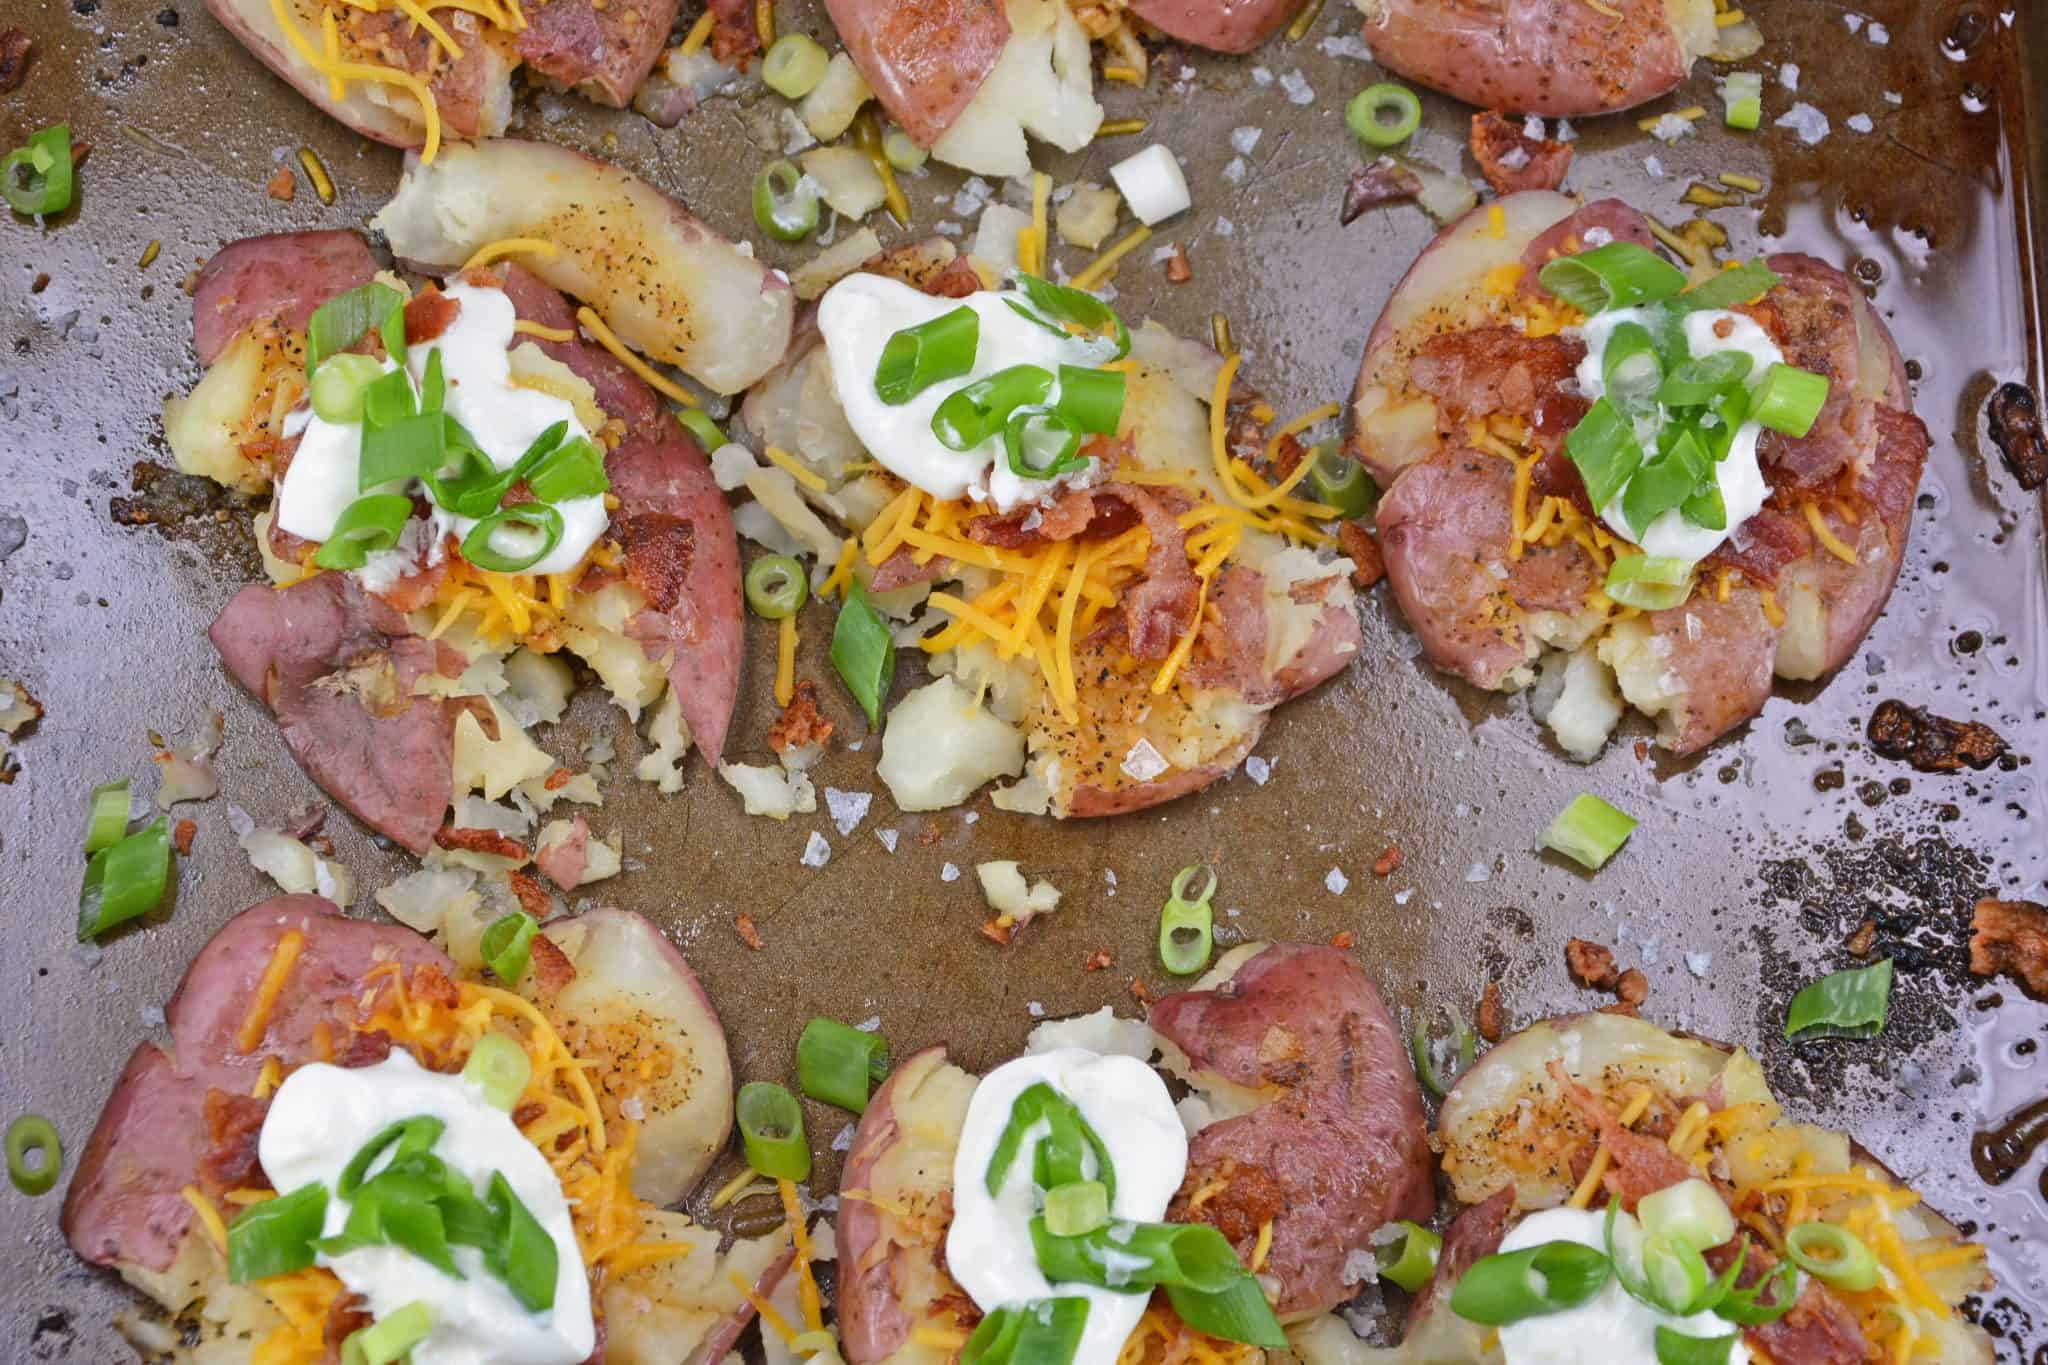 Loaded Smashed Potatoes are a cross between a loaded baked potato and loaded mashed potatoes. Topped with a zesty butter sauce, cheese, bacon, sour cream and scallions. #smashedpotatoes #potatorecipes www.savoryexperiments.com